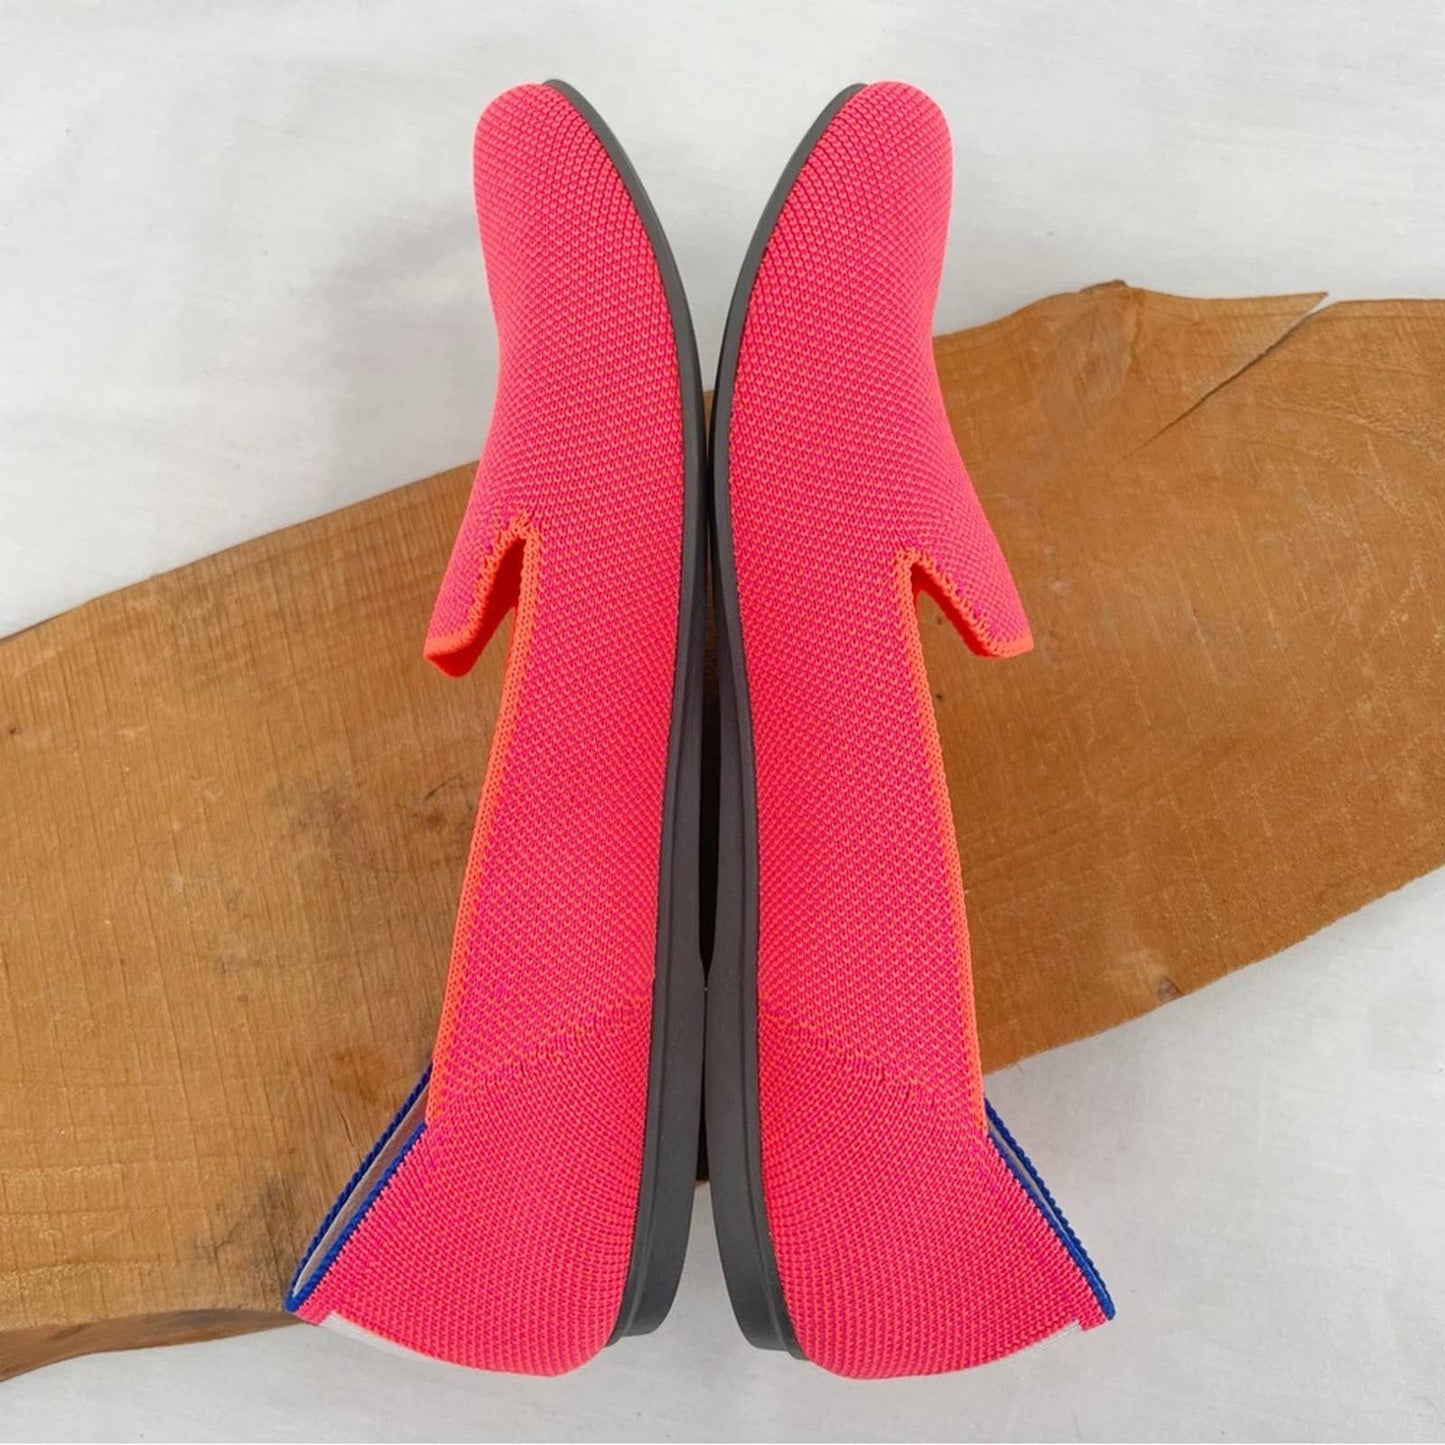 Rothy’s The Loafer Flamingo Hot Pink Neon Orange Smoking Flats Slip On Shoes Size 8